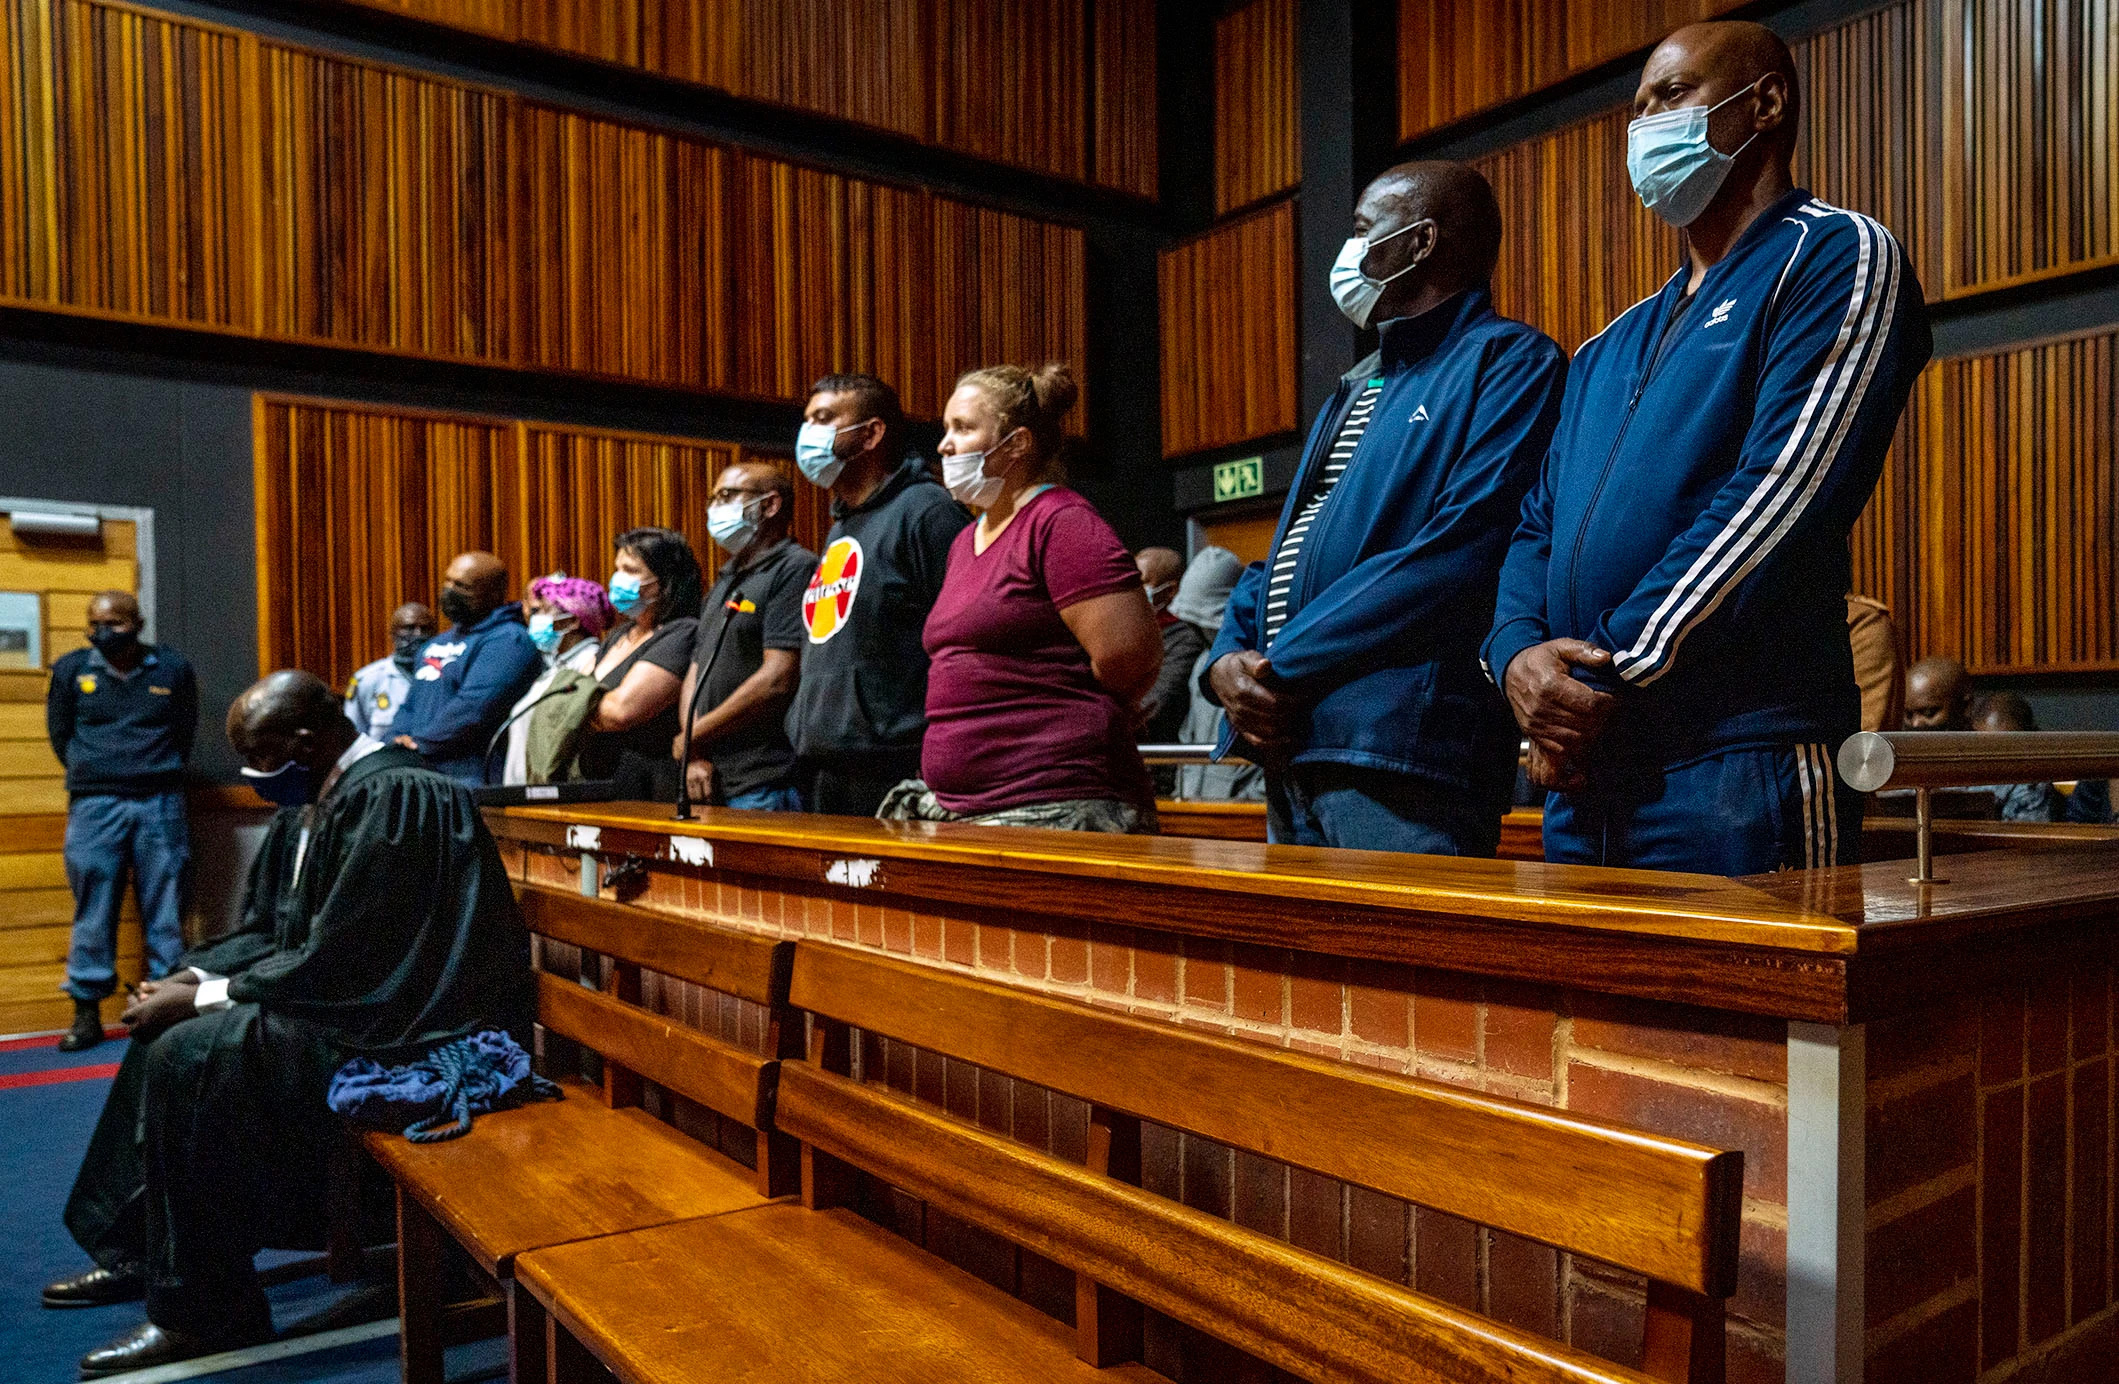 Blue lights accused in court